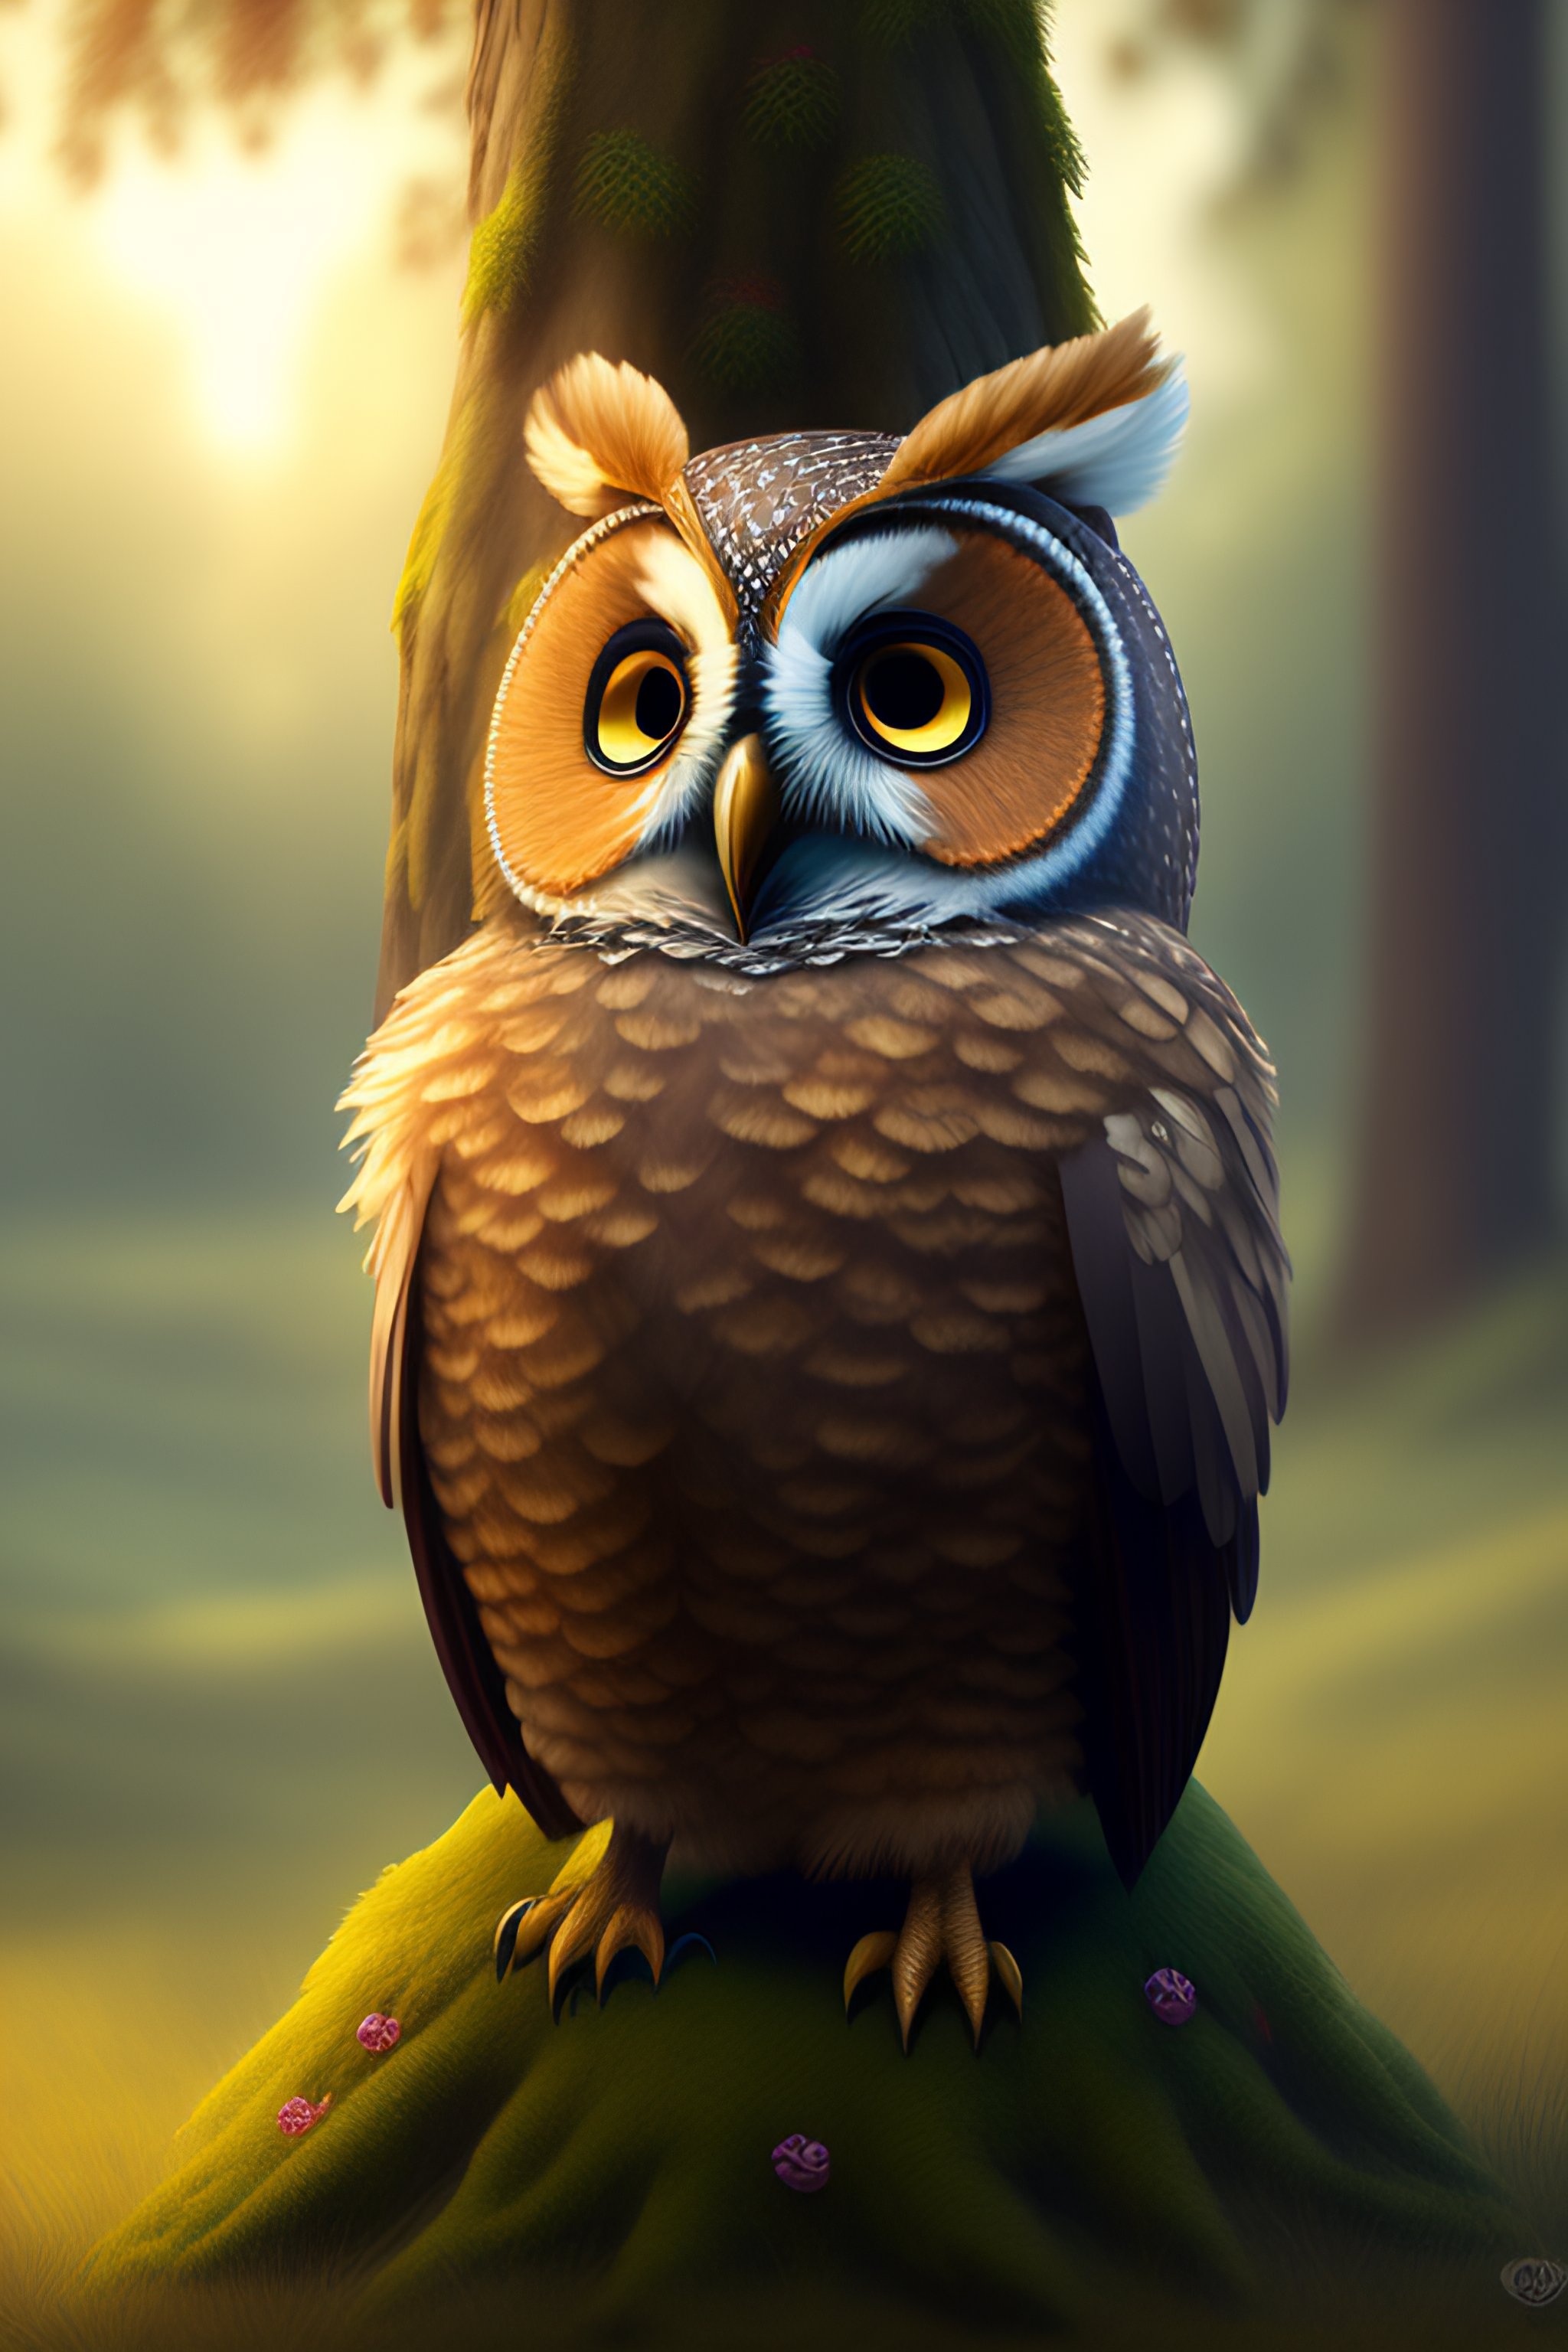 Cool, Cute and Adorable Humanoid Owl in Stylish Sportswear: A